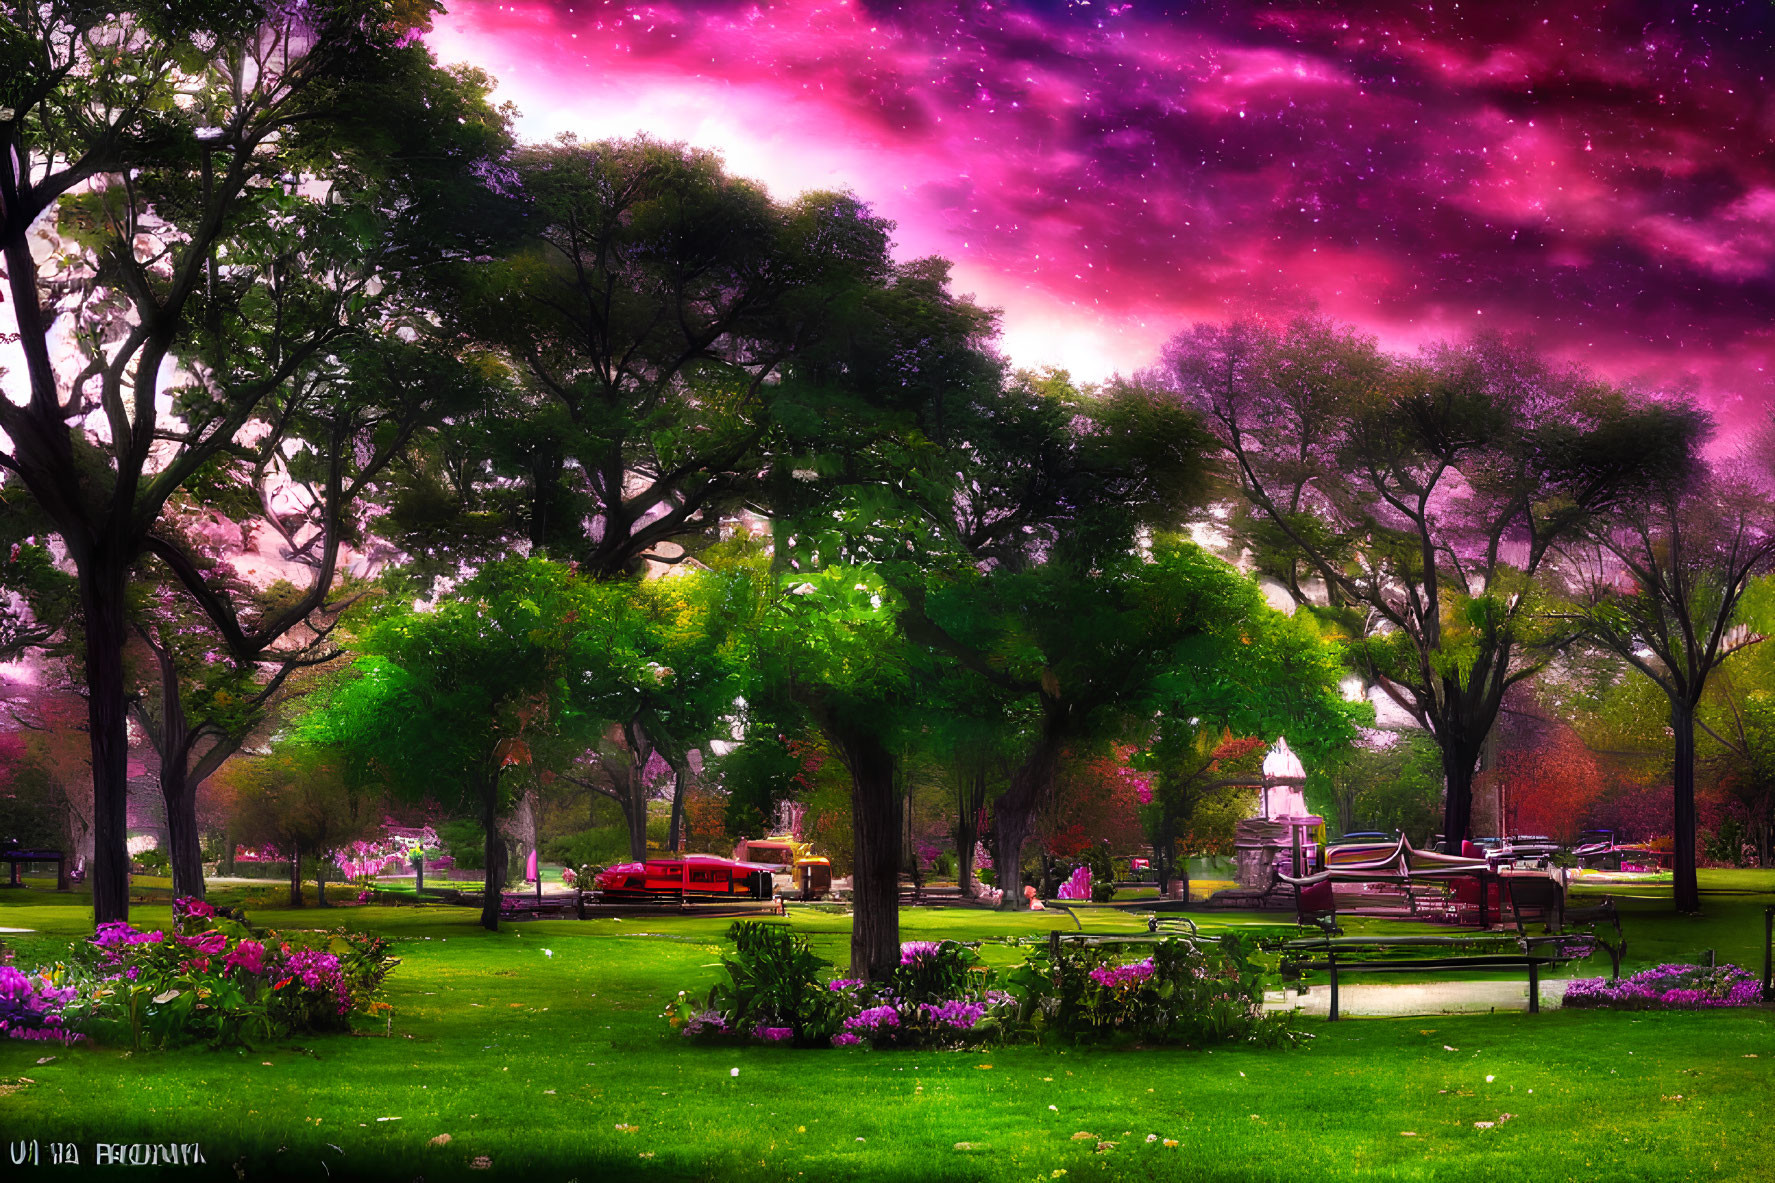 Lush green trees, red vehicle, park benches under surreal starry sky